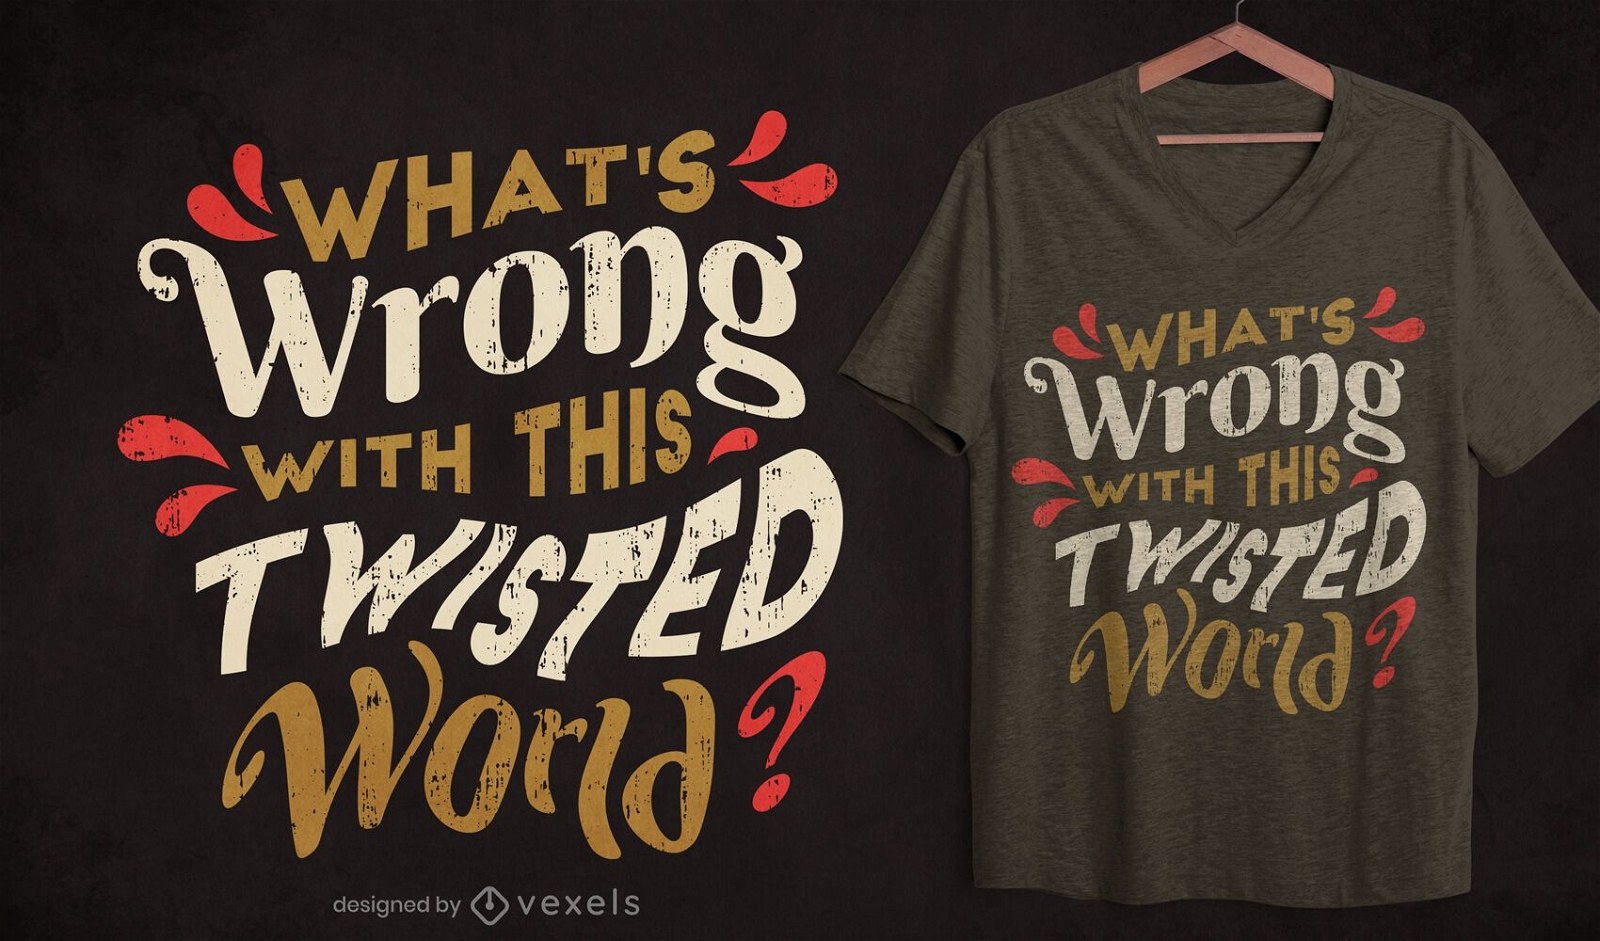 Twisted world quote t-shirt design